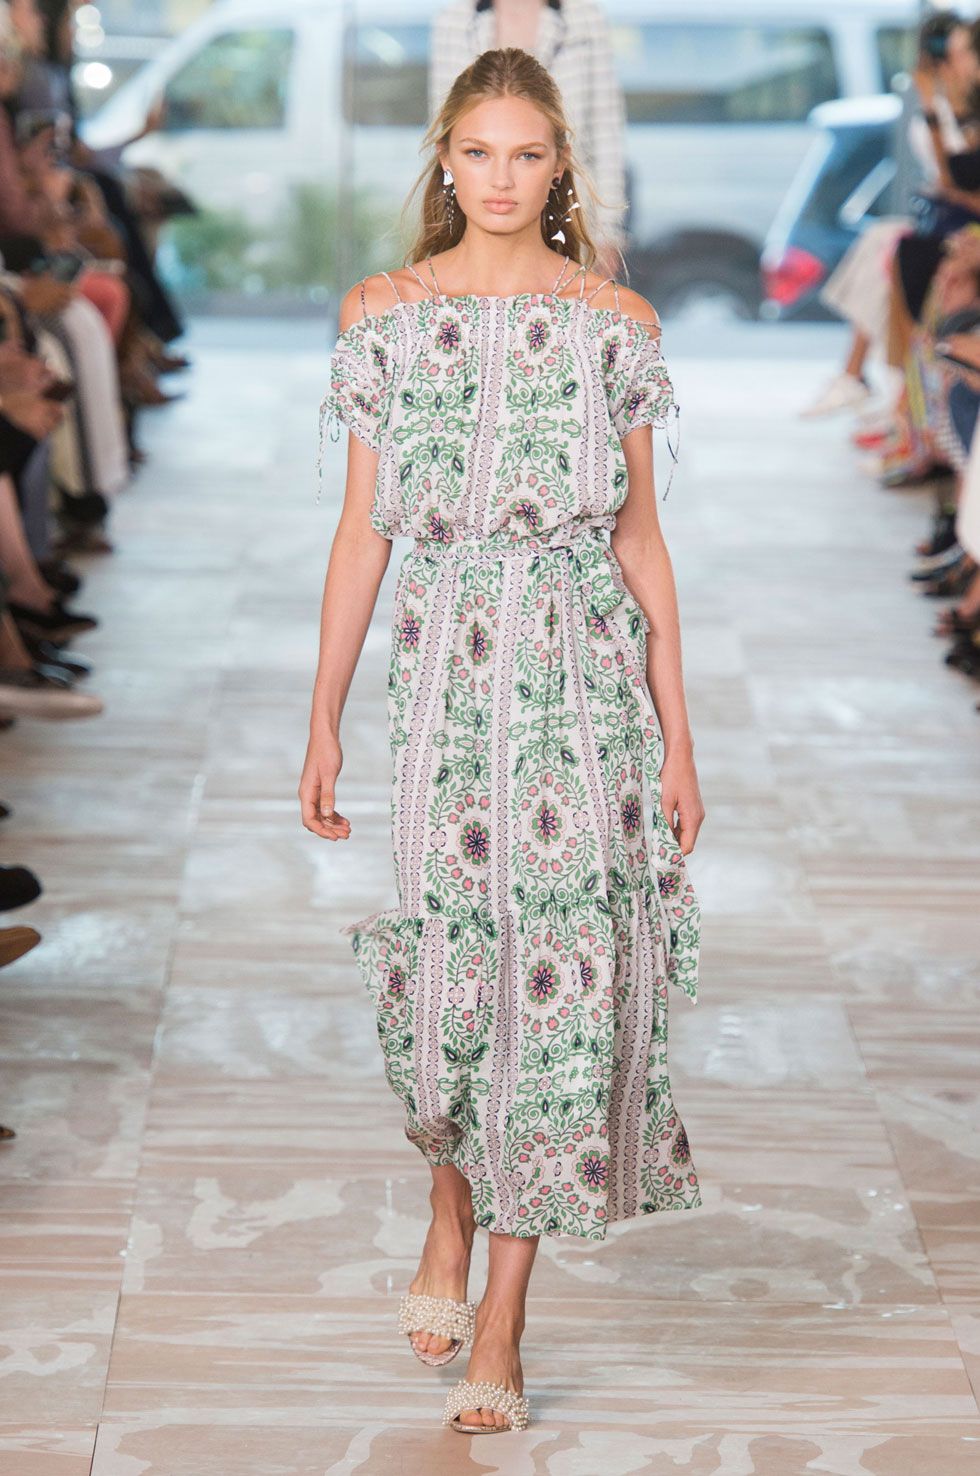 40 Looks From the Tory Burch Spring 2017 Show - Tory Burch Runway Show at  New York Fashion Week